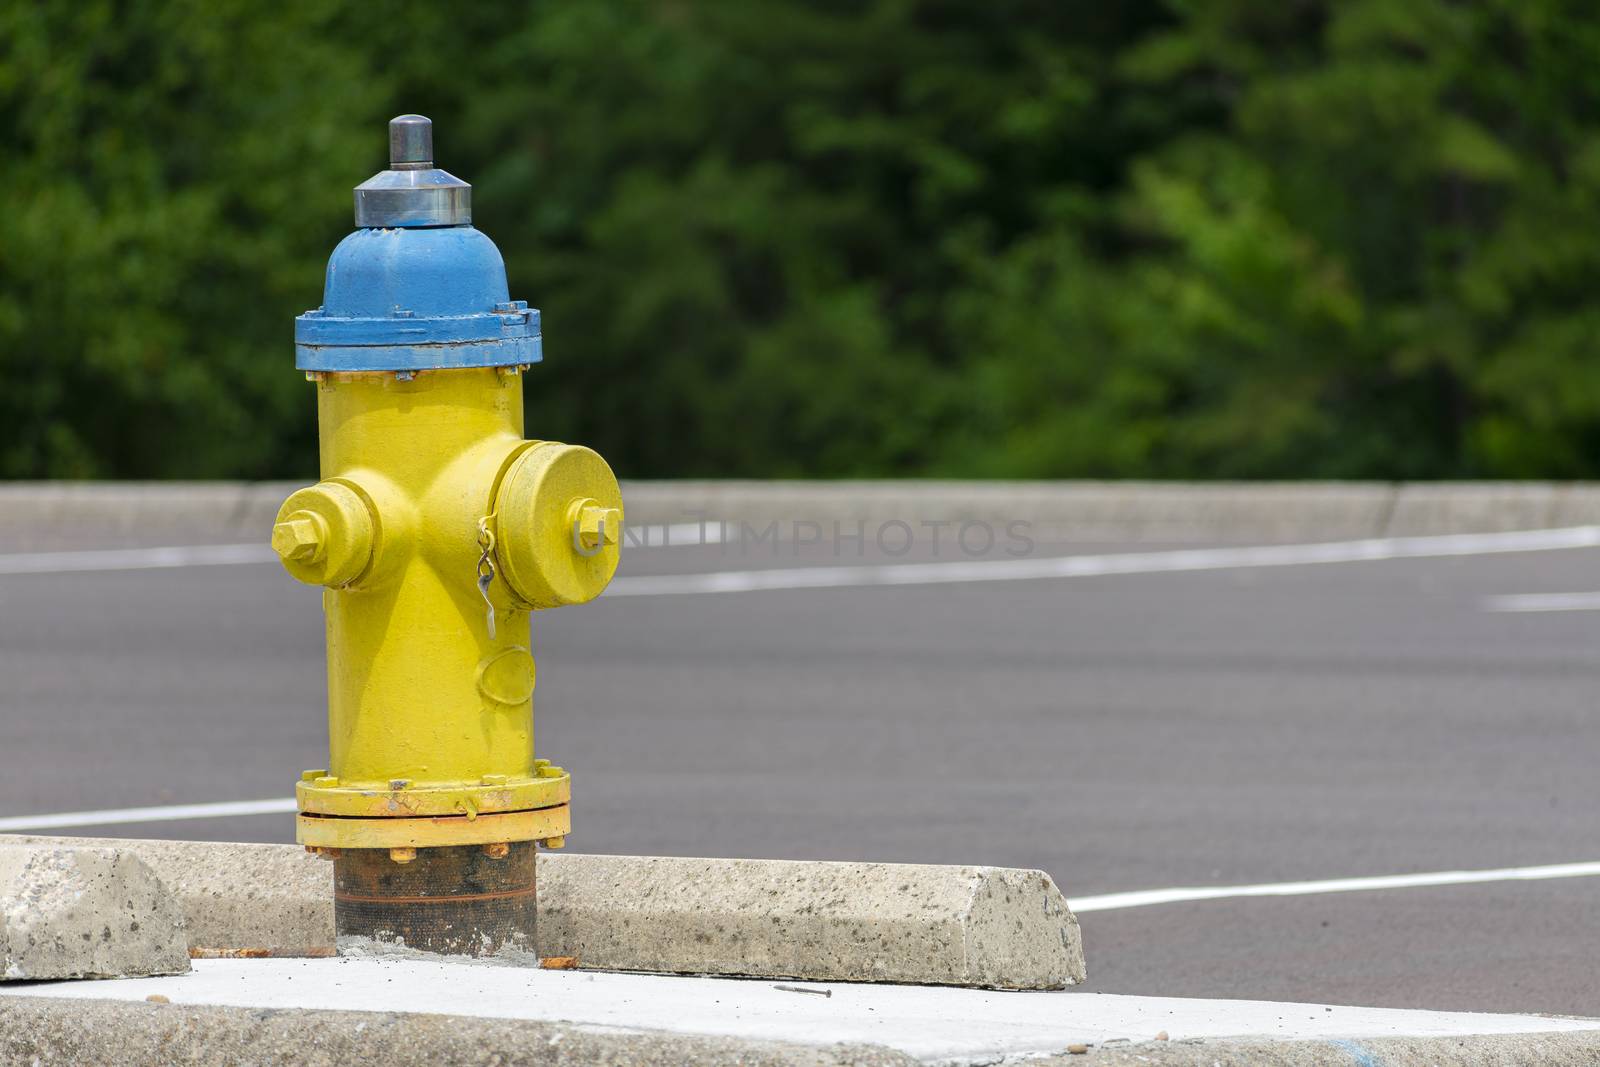 Old Yellow and Blue Fire Hydrant With Copy Space by stockbuster1